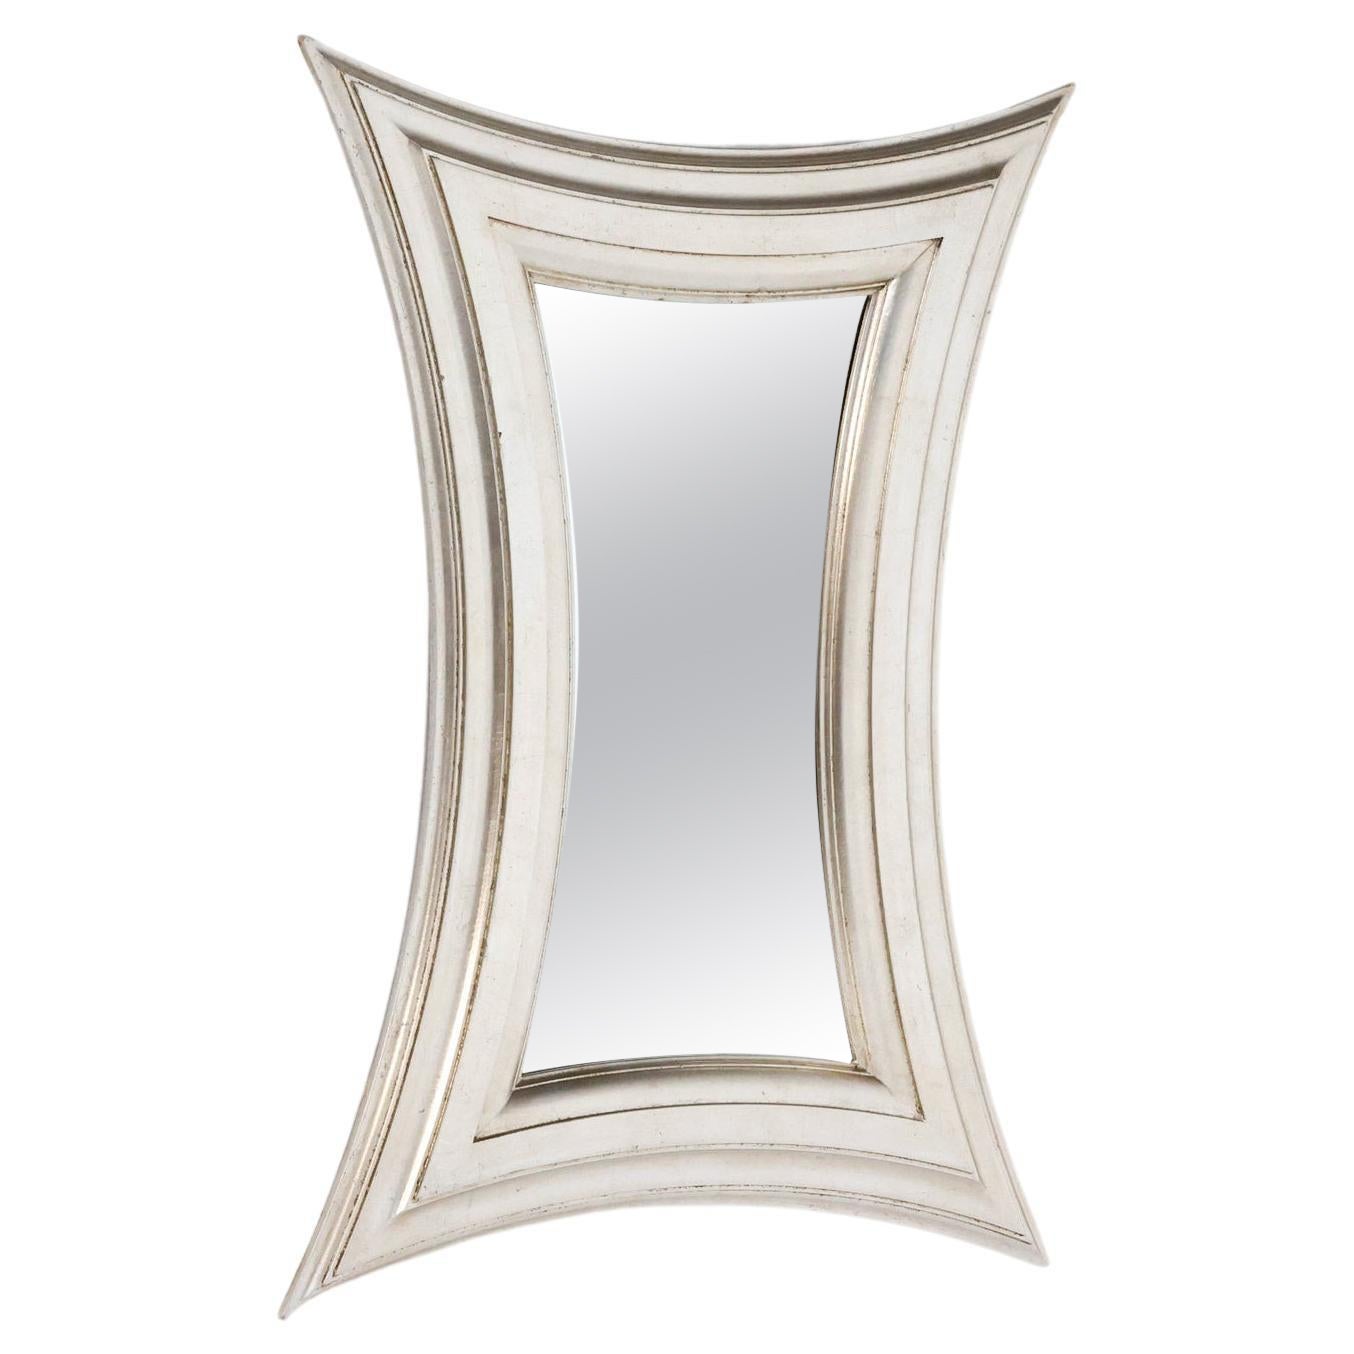 Hollywood Regency Mirror with Metal Frame, Organic Deconstructed Rectangle, 1940 For Sale